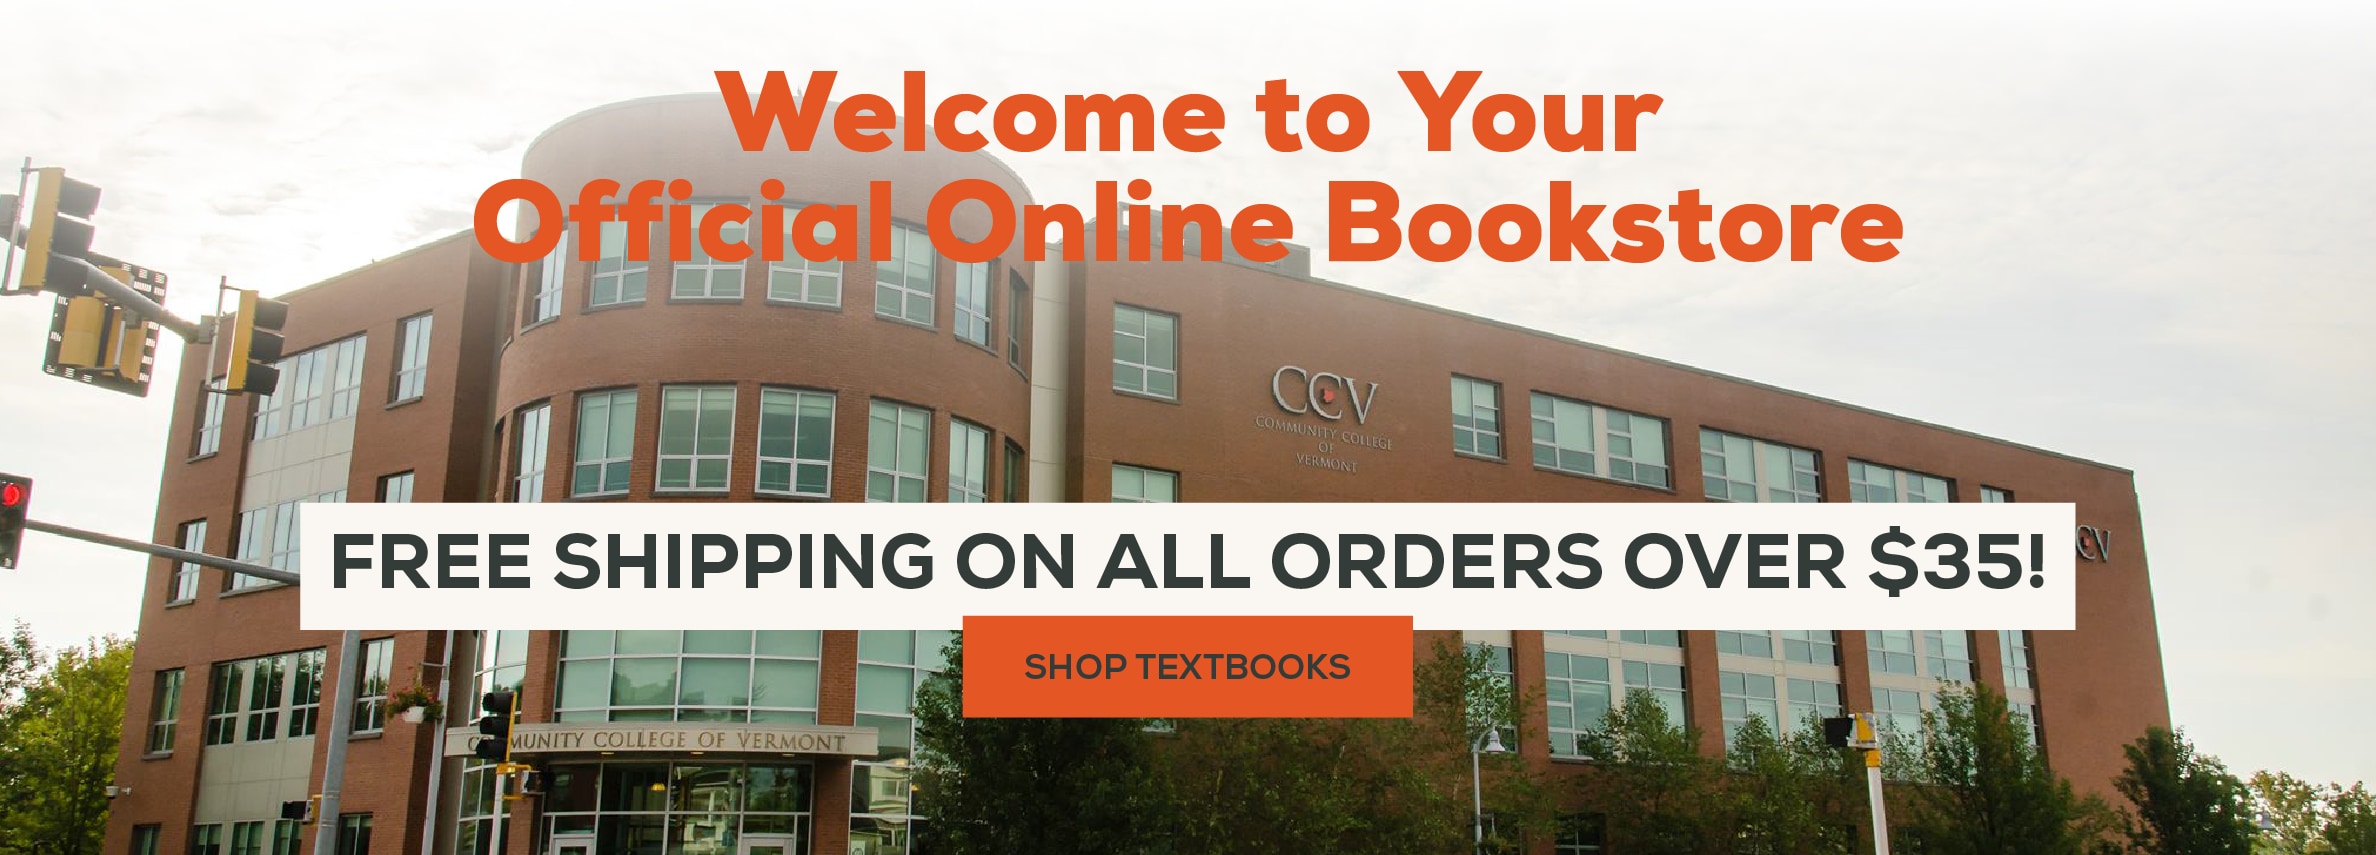 Welcome to your official Online Bookstore. Free shipping on all orders over $35! (new tab)